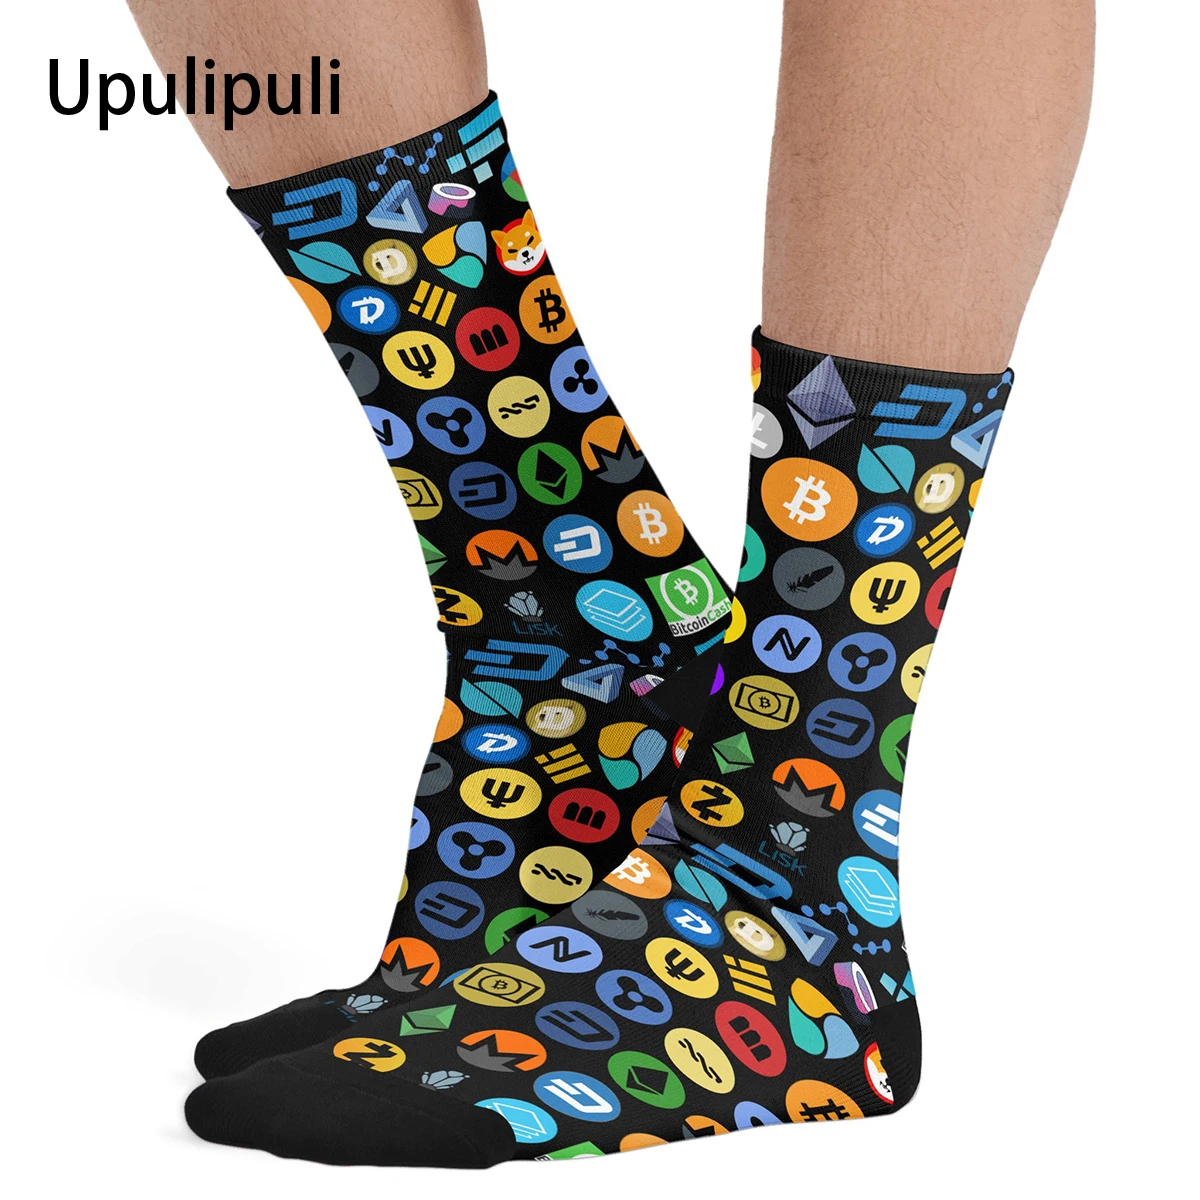 

For Men Crypto Logos Thick Contrast Color Socks 85% Polyester Clothes Socks Cryptocurrency Bitcoin Middle Tube Socks Gift Idea